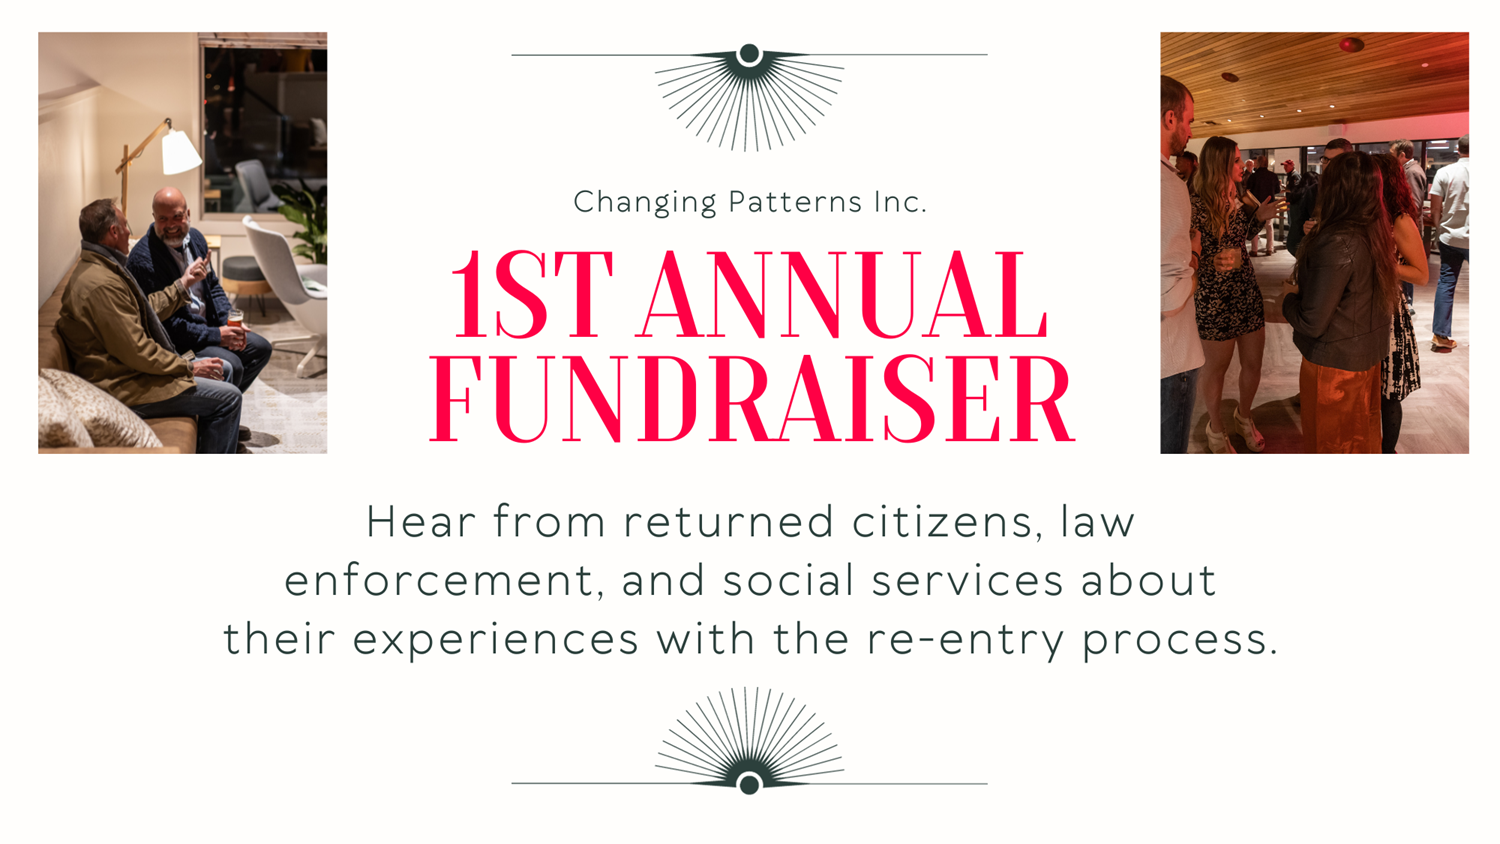 Fundraiser for Changing Patterns